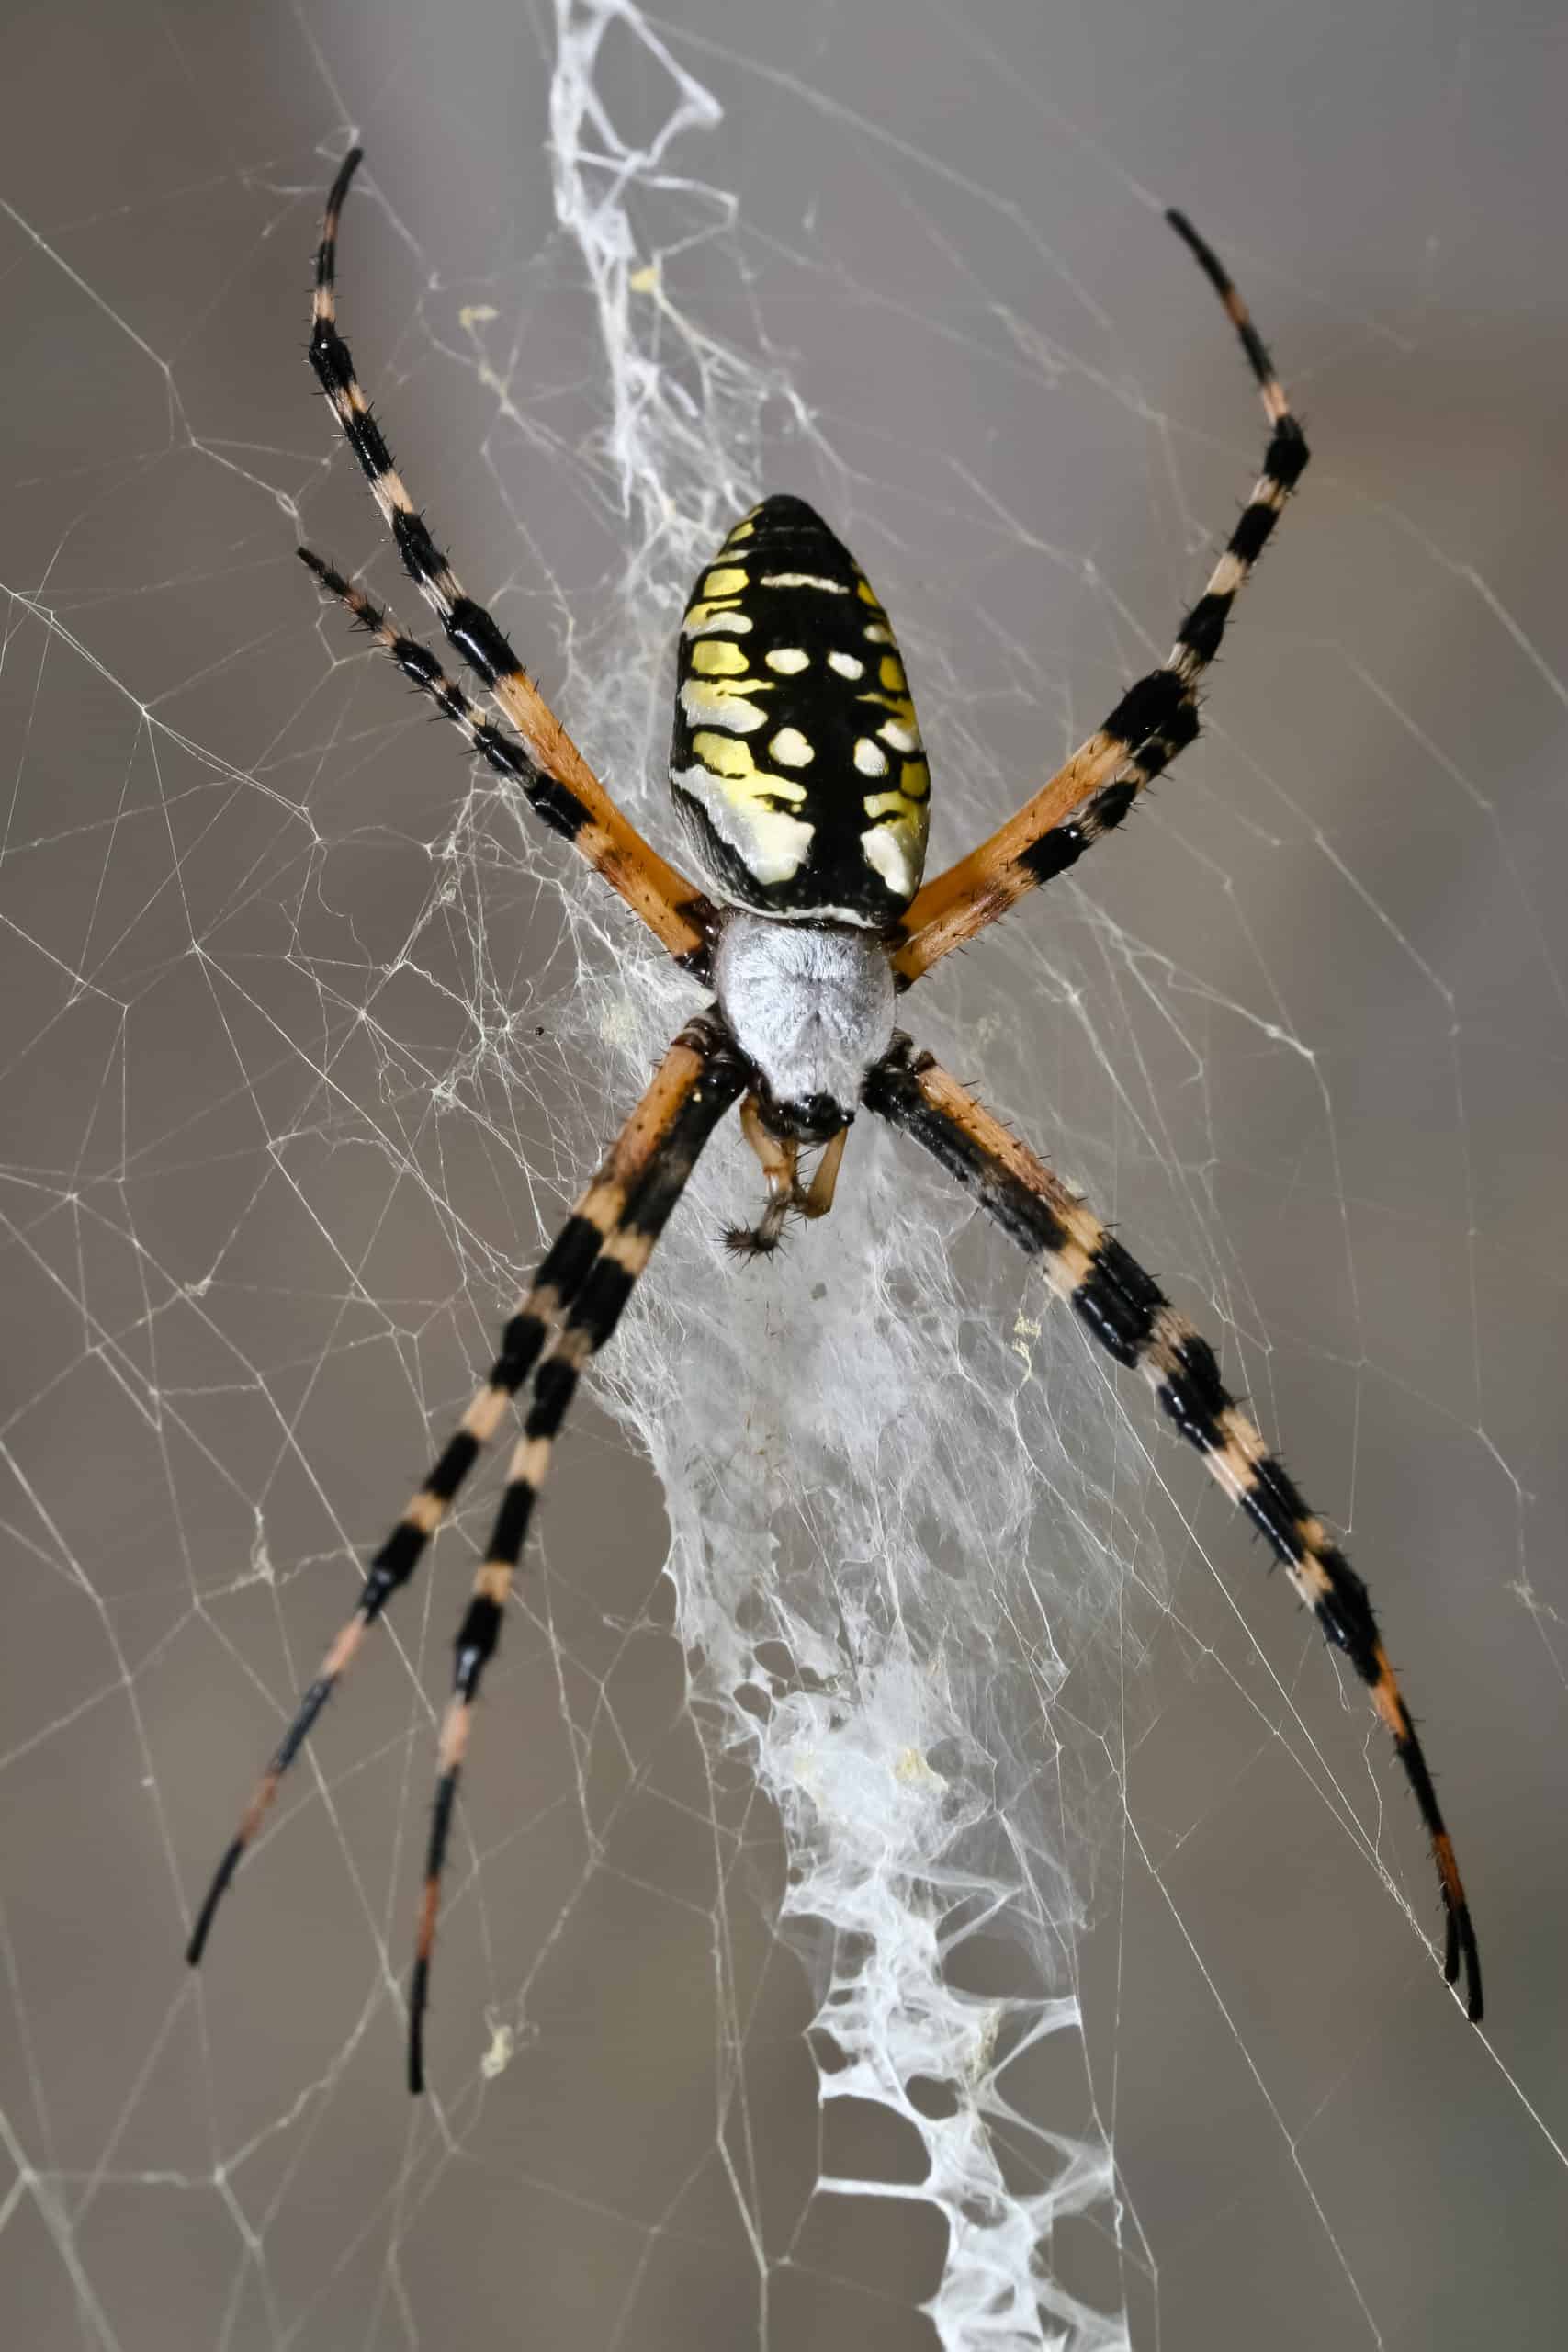 Why Do Spiders Weave Webs? – Maggie's Farm Ltd